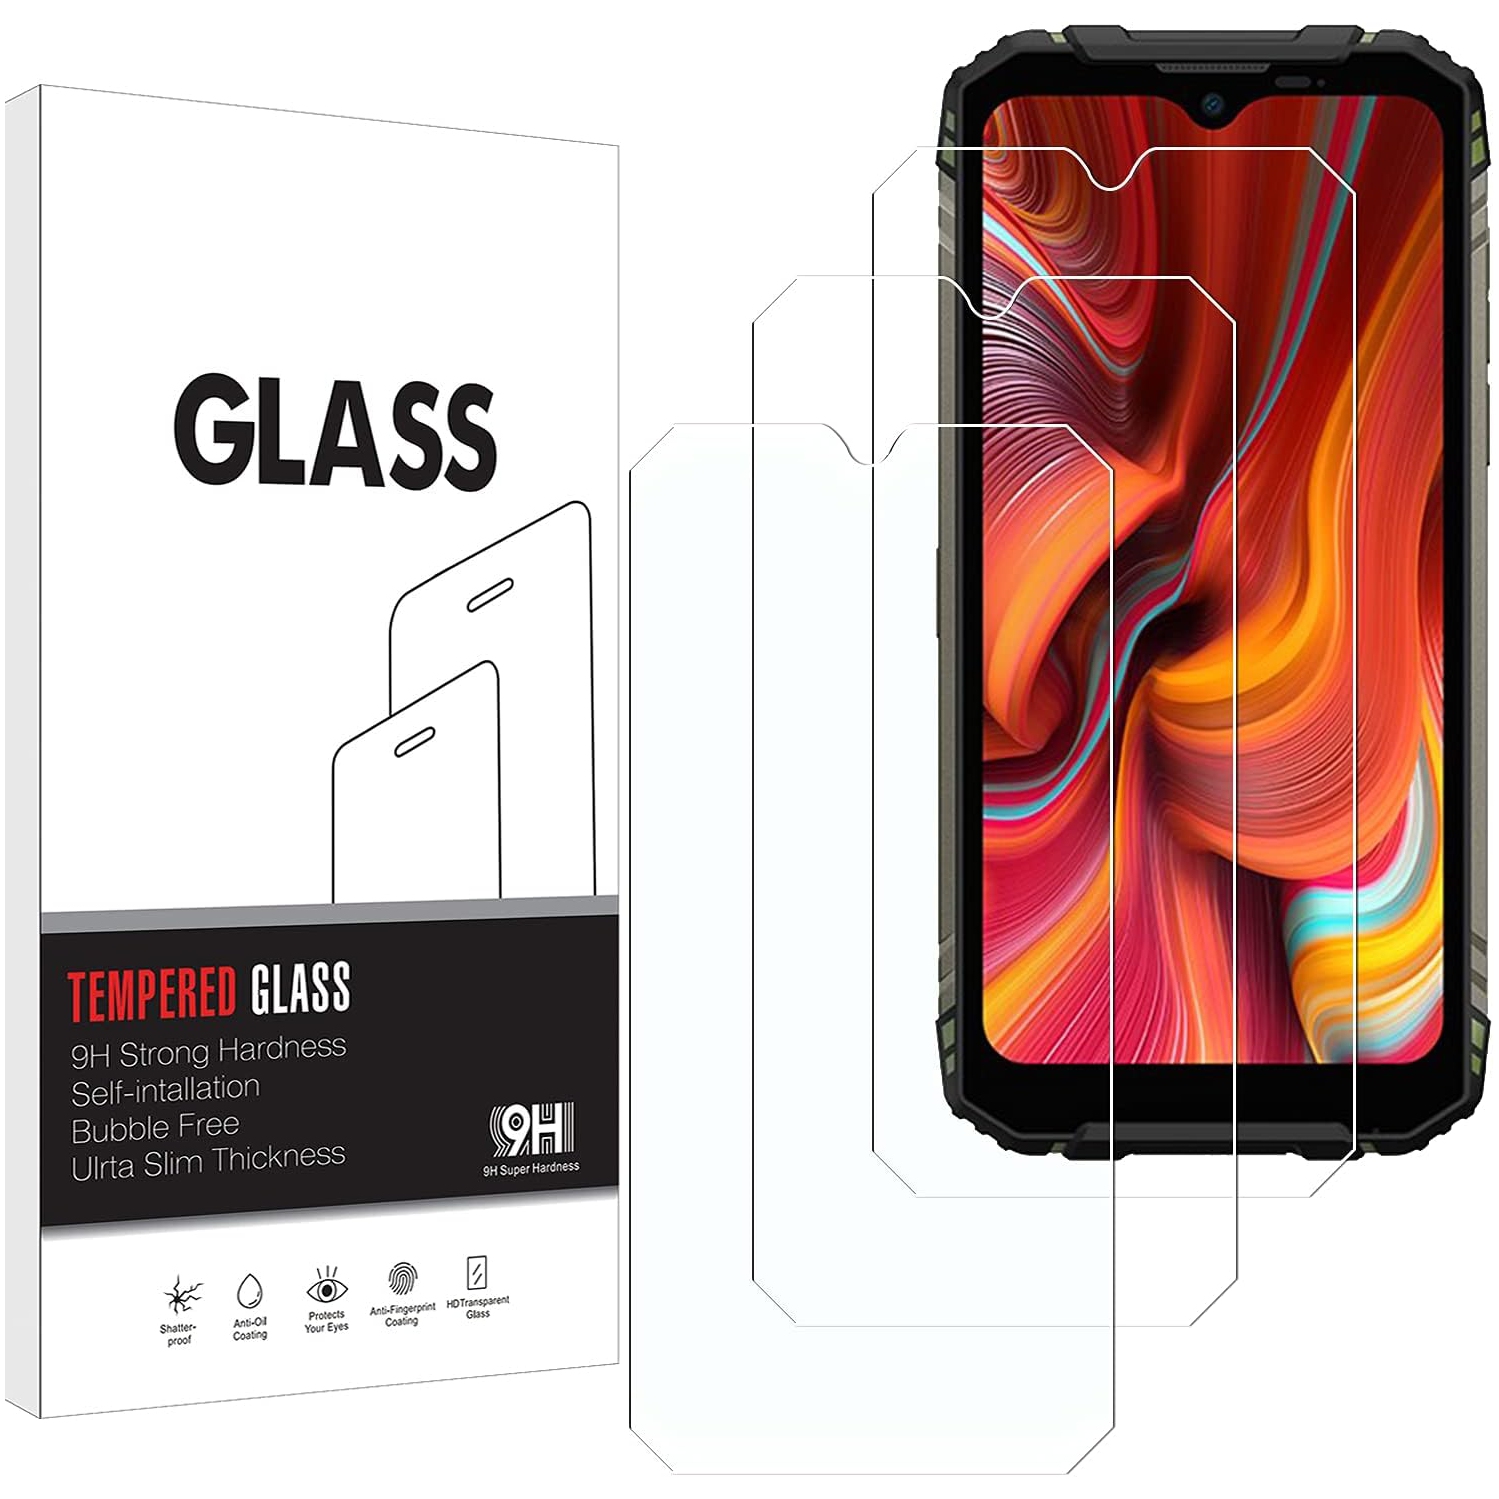 Screen Protector Compatible with DOOGEE S96 Pro [3 Pack], Easy to Install, HD Anti-Scratch Anti-Fingerprint